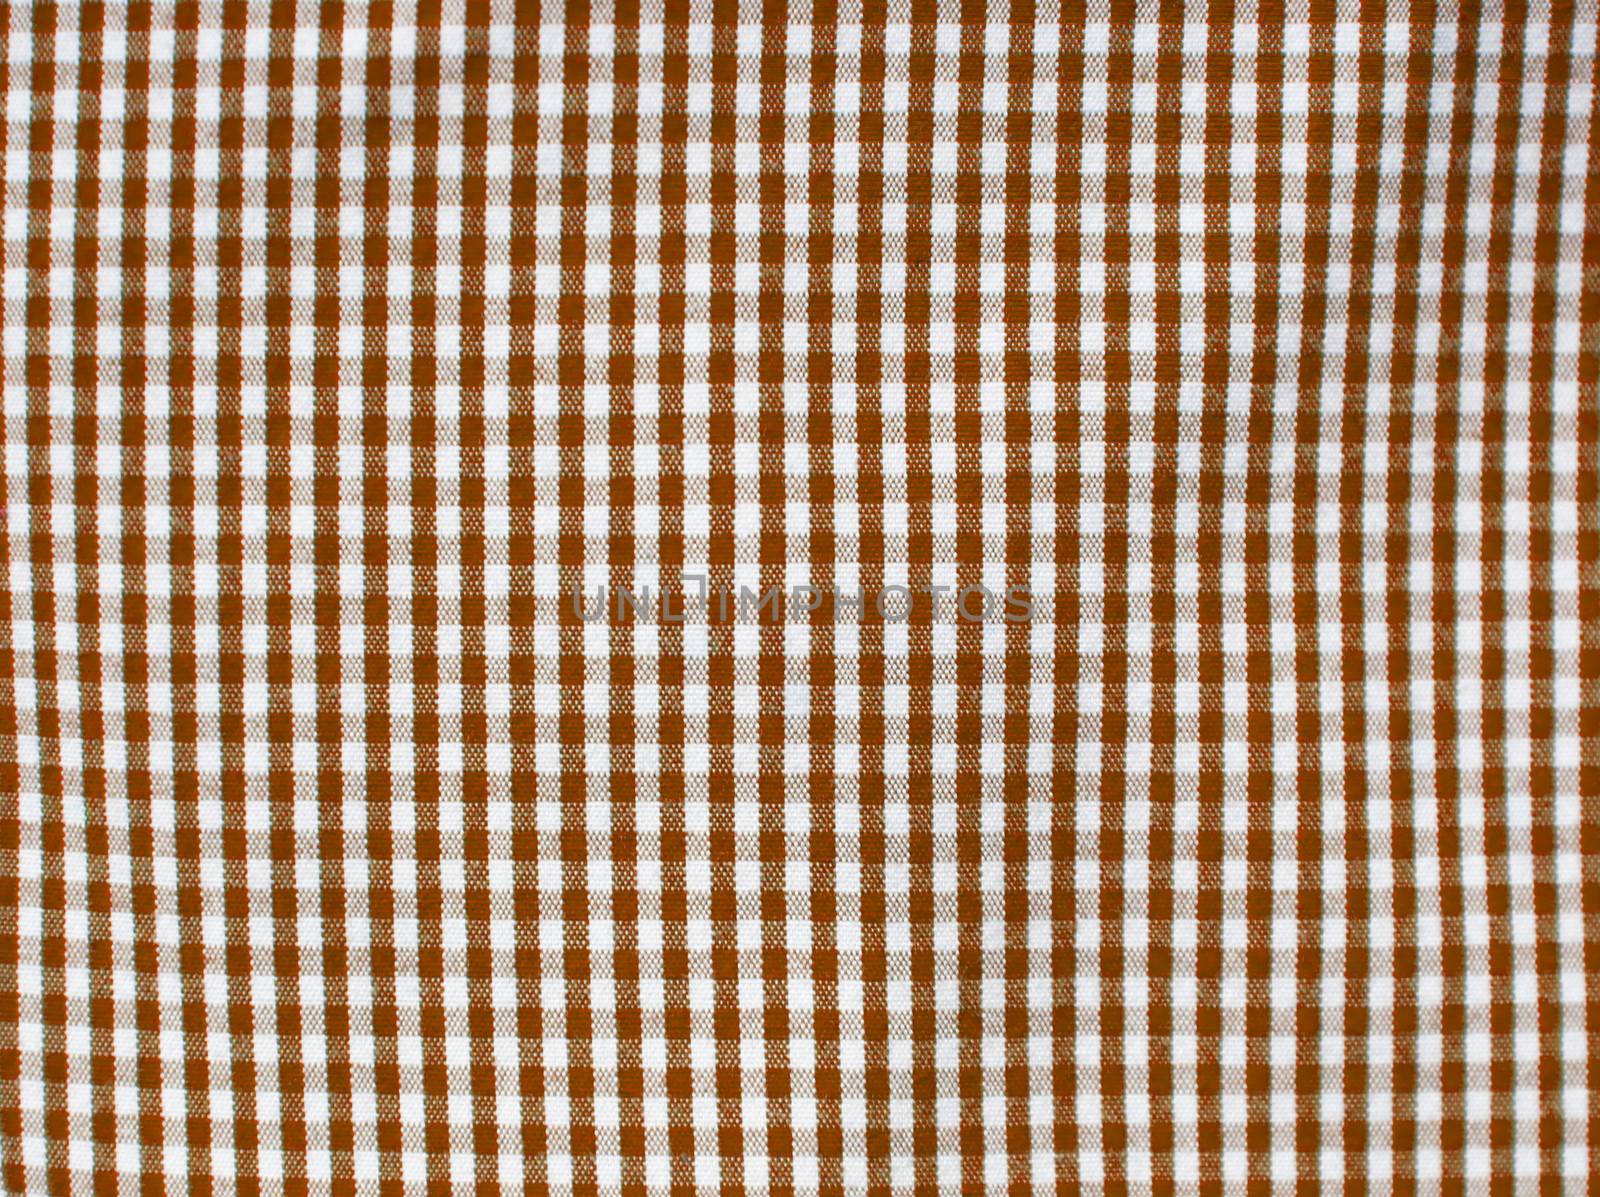 Brown square fabric pattern for background by nuchylee